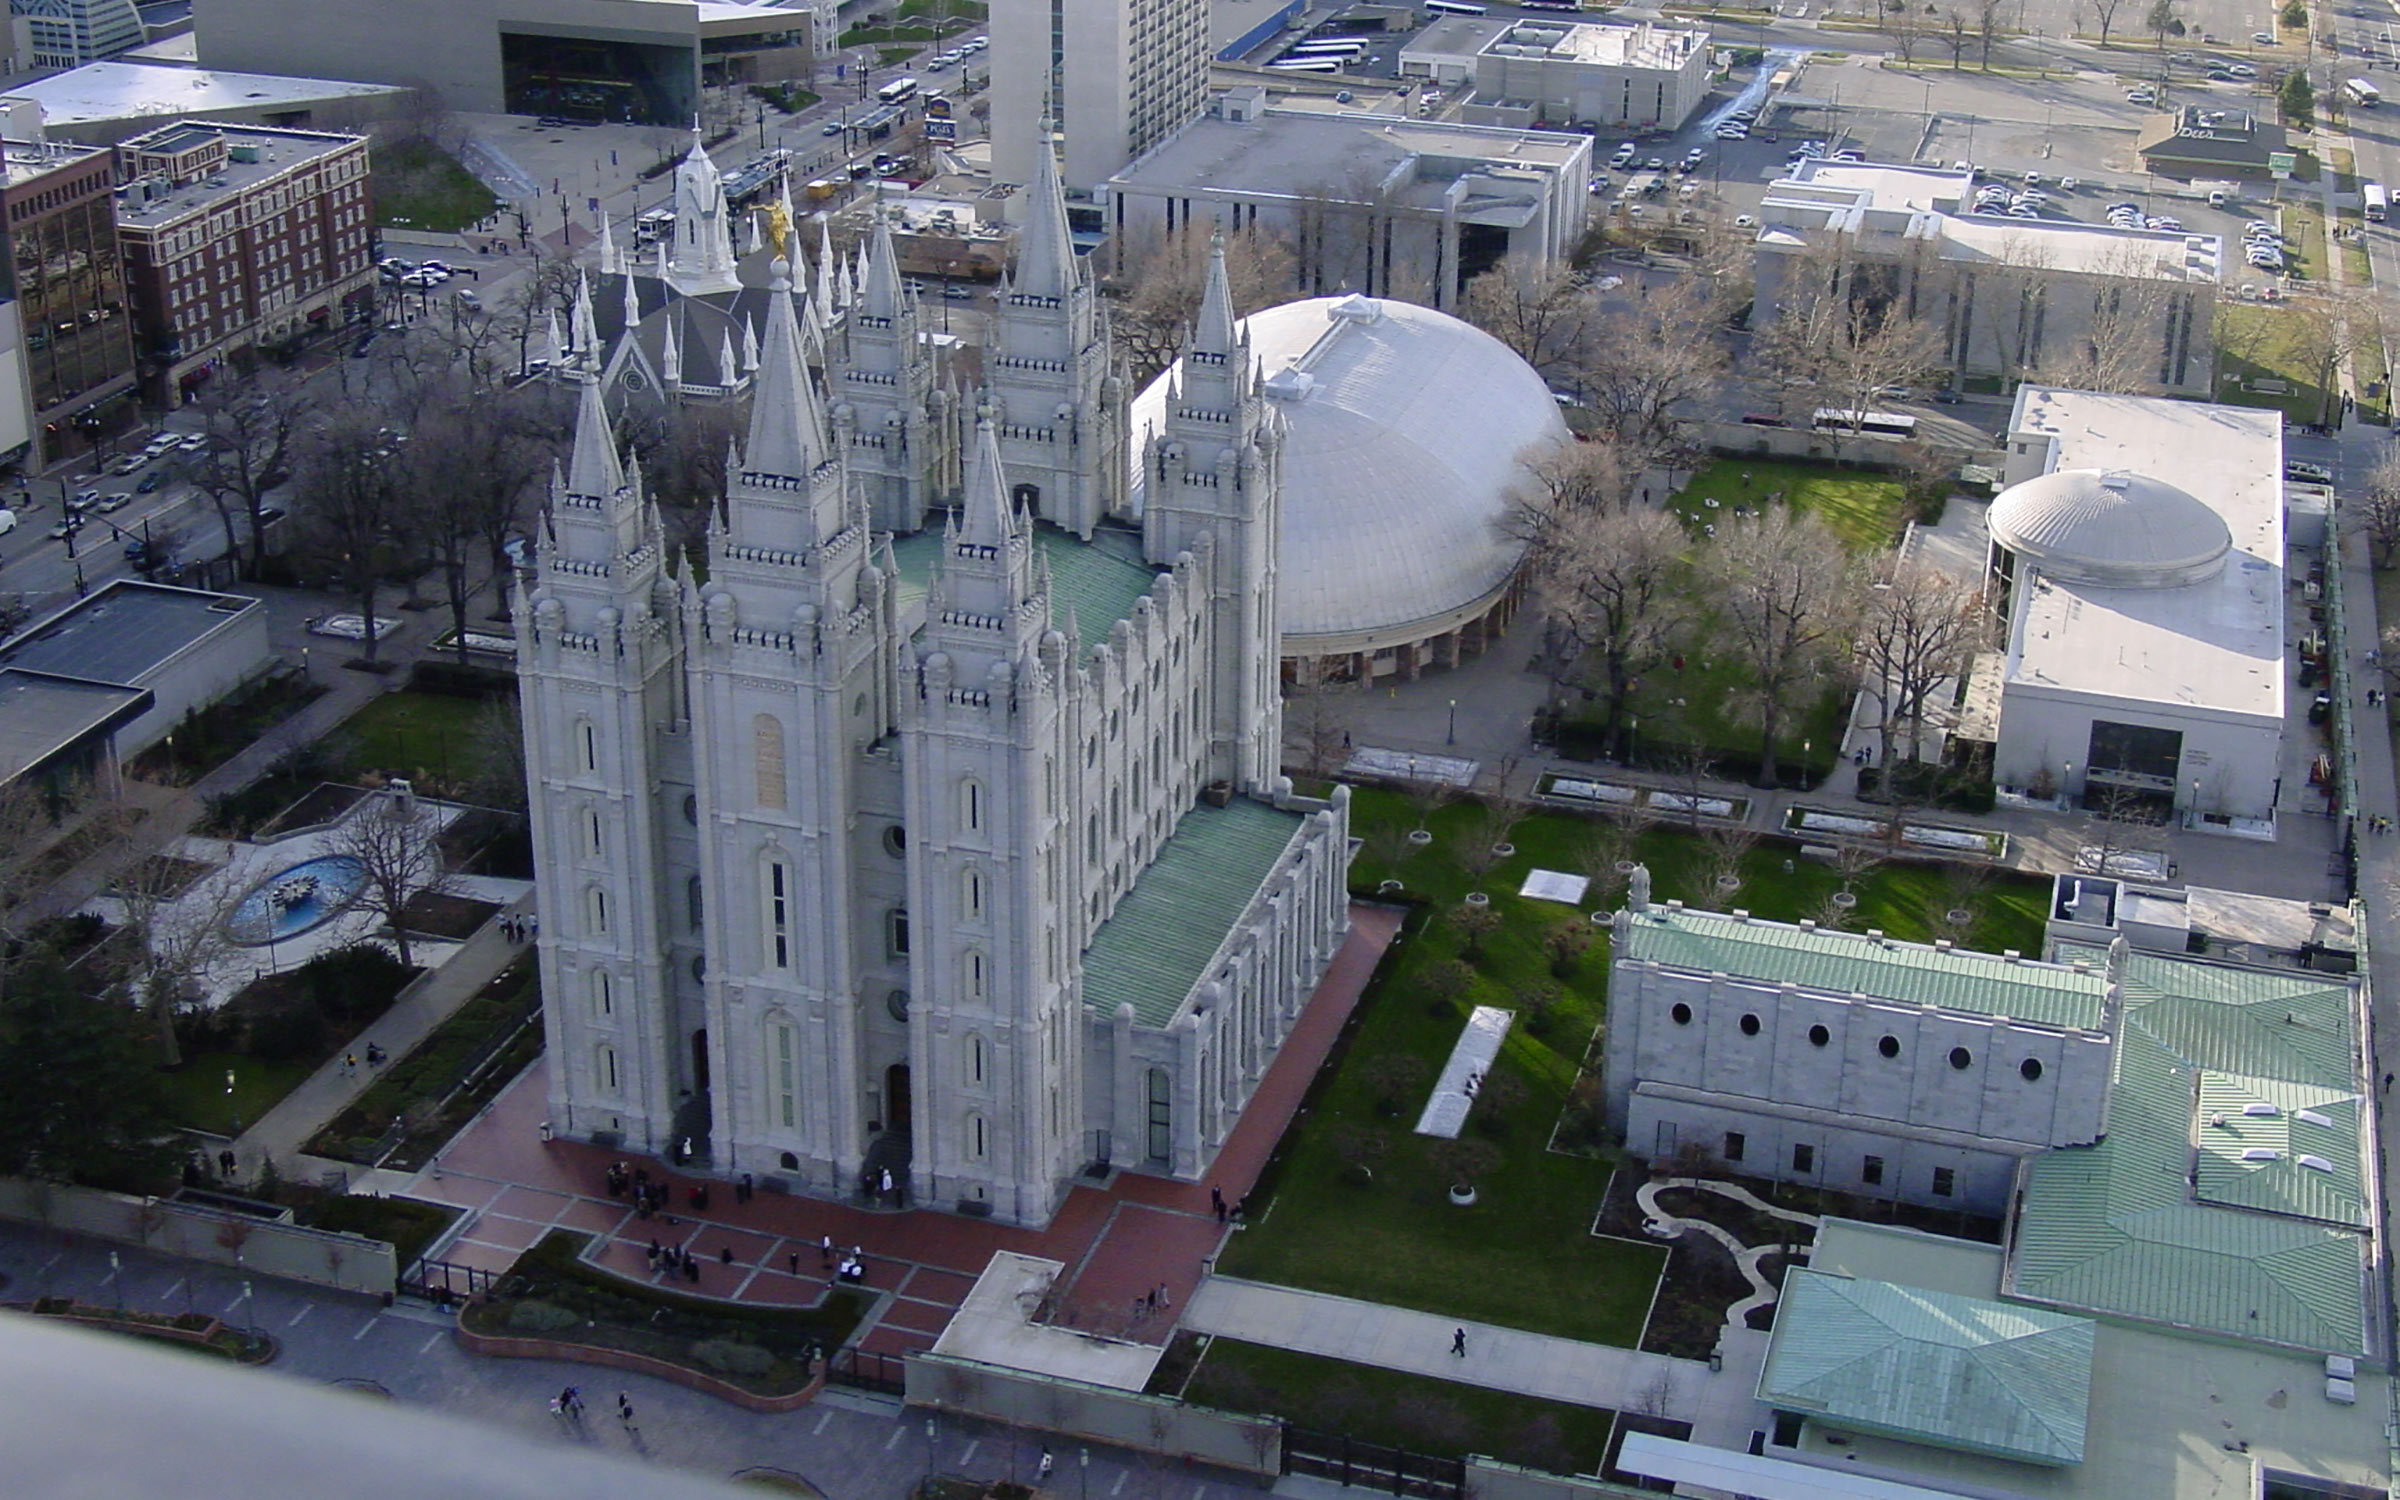 Salt Lake City Temple from high above, an important place to me